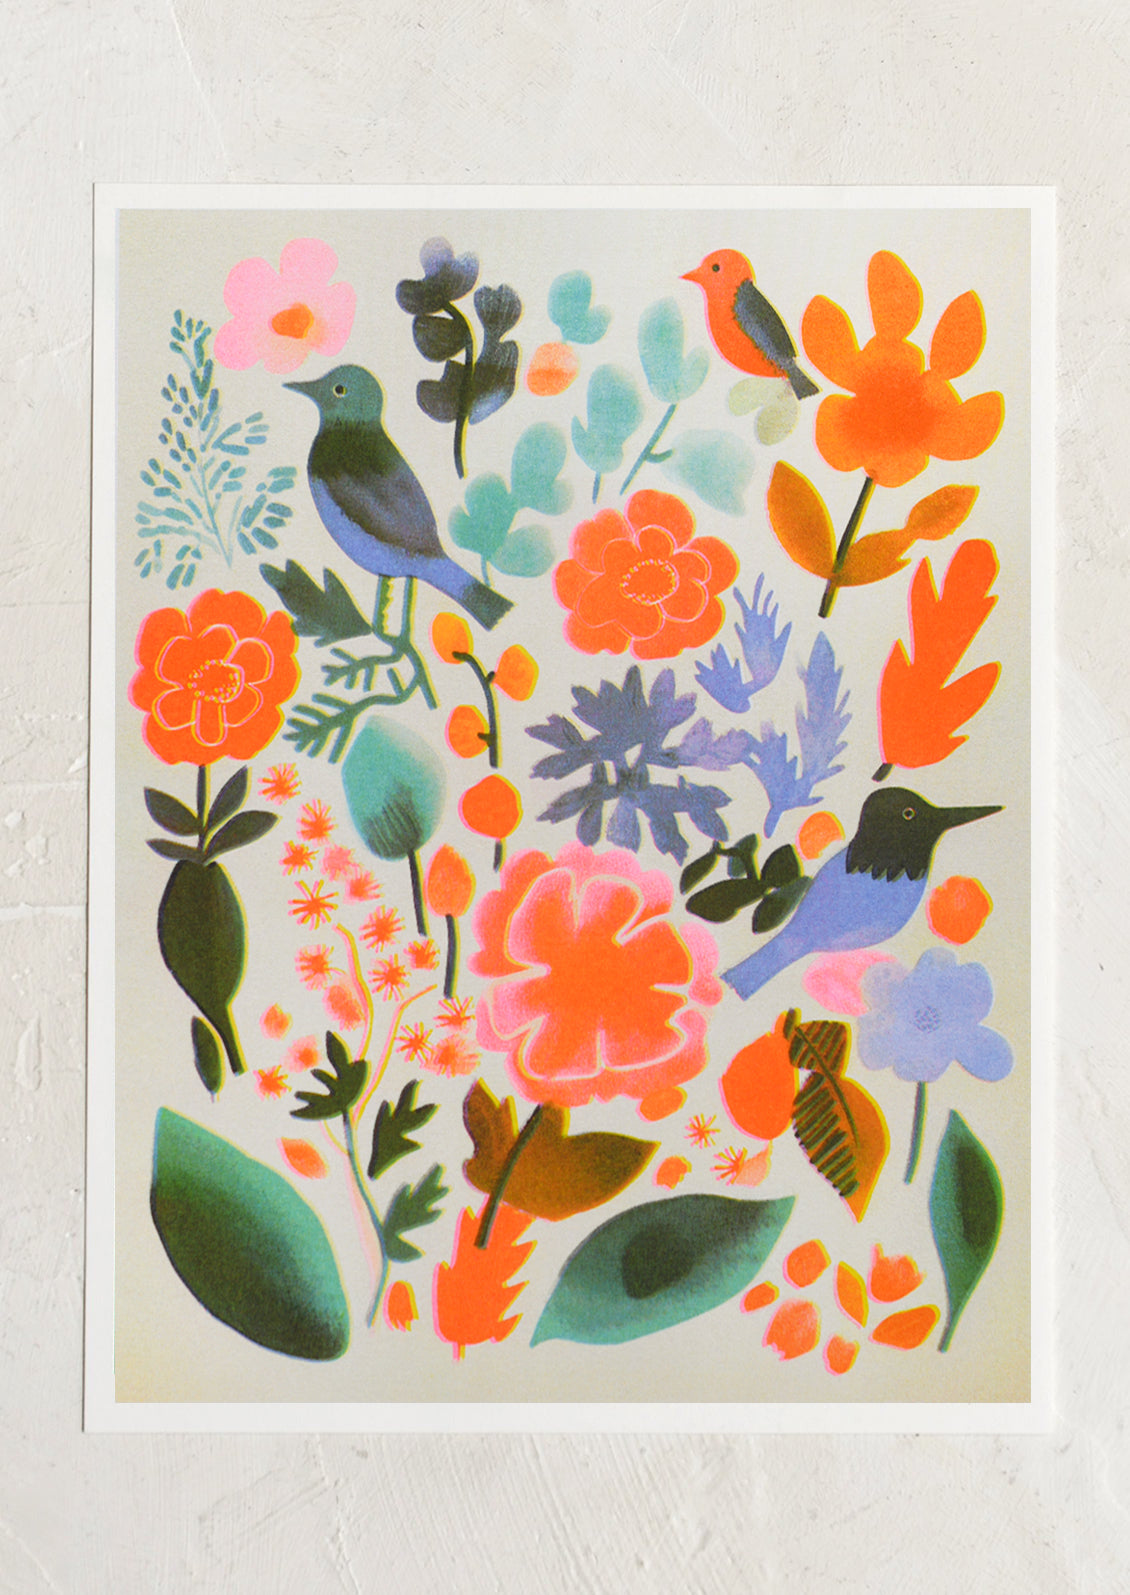 A colorful art print with neon tinged arrangement of leaves, flowers and birds.